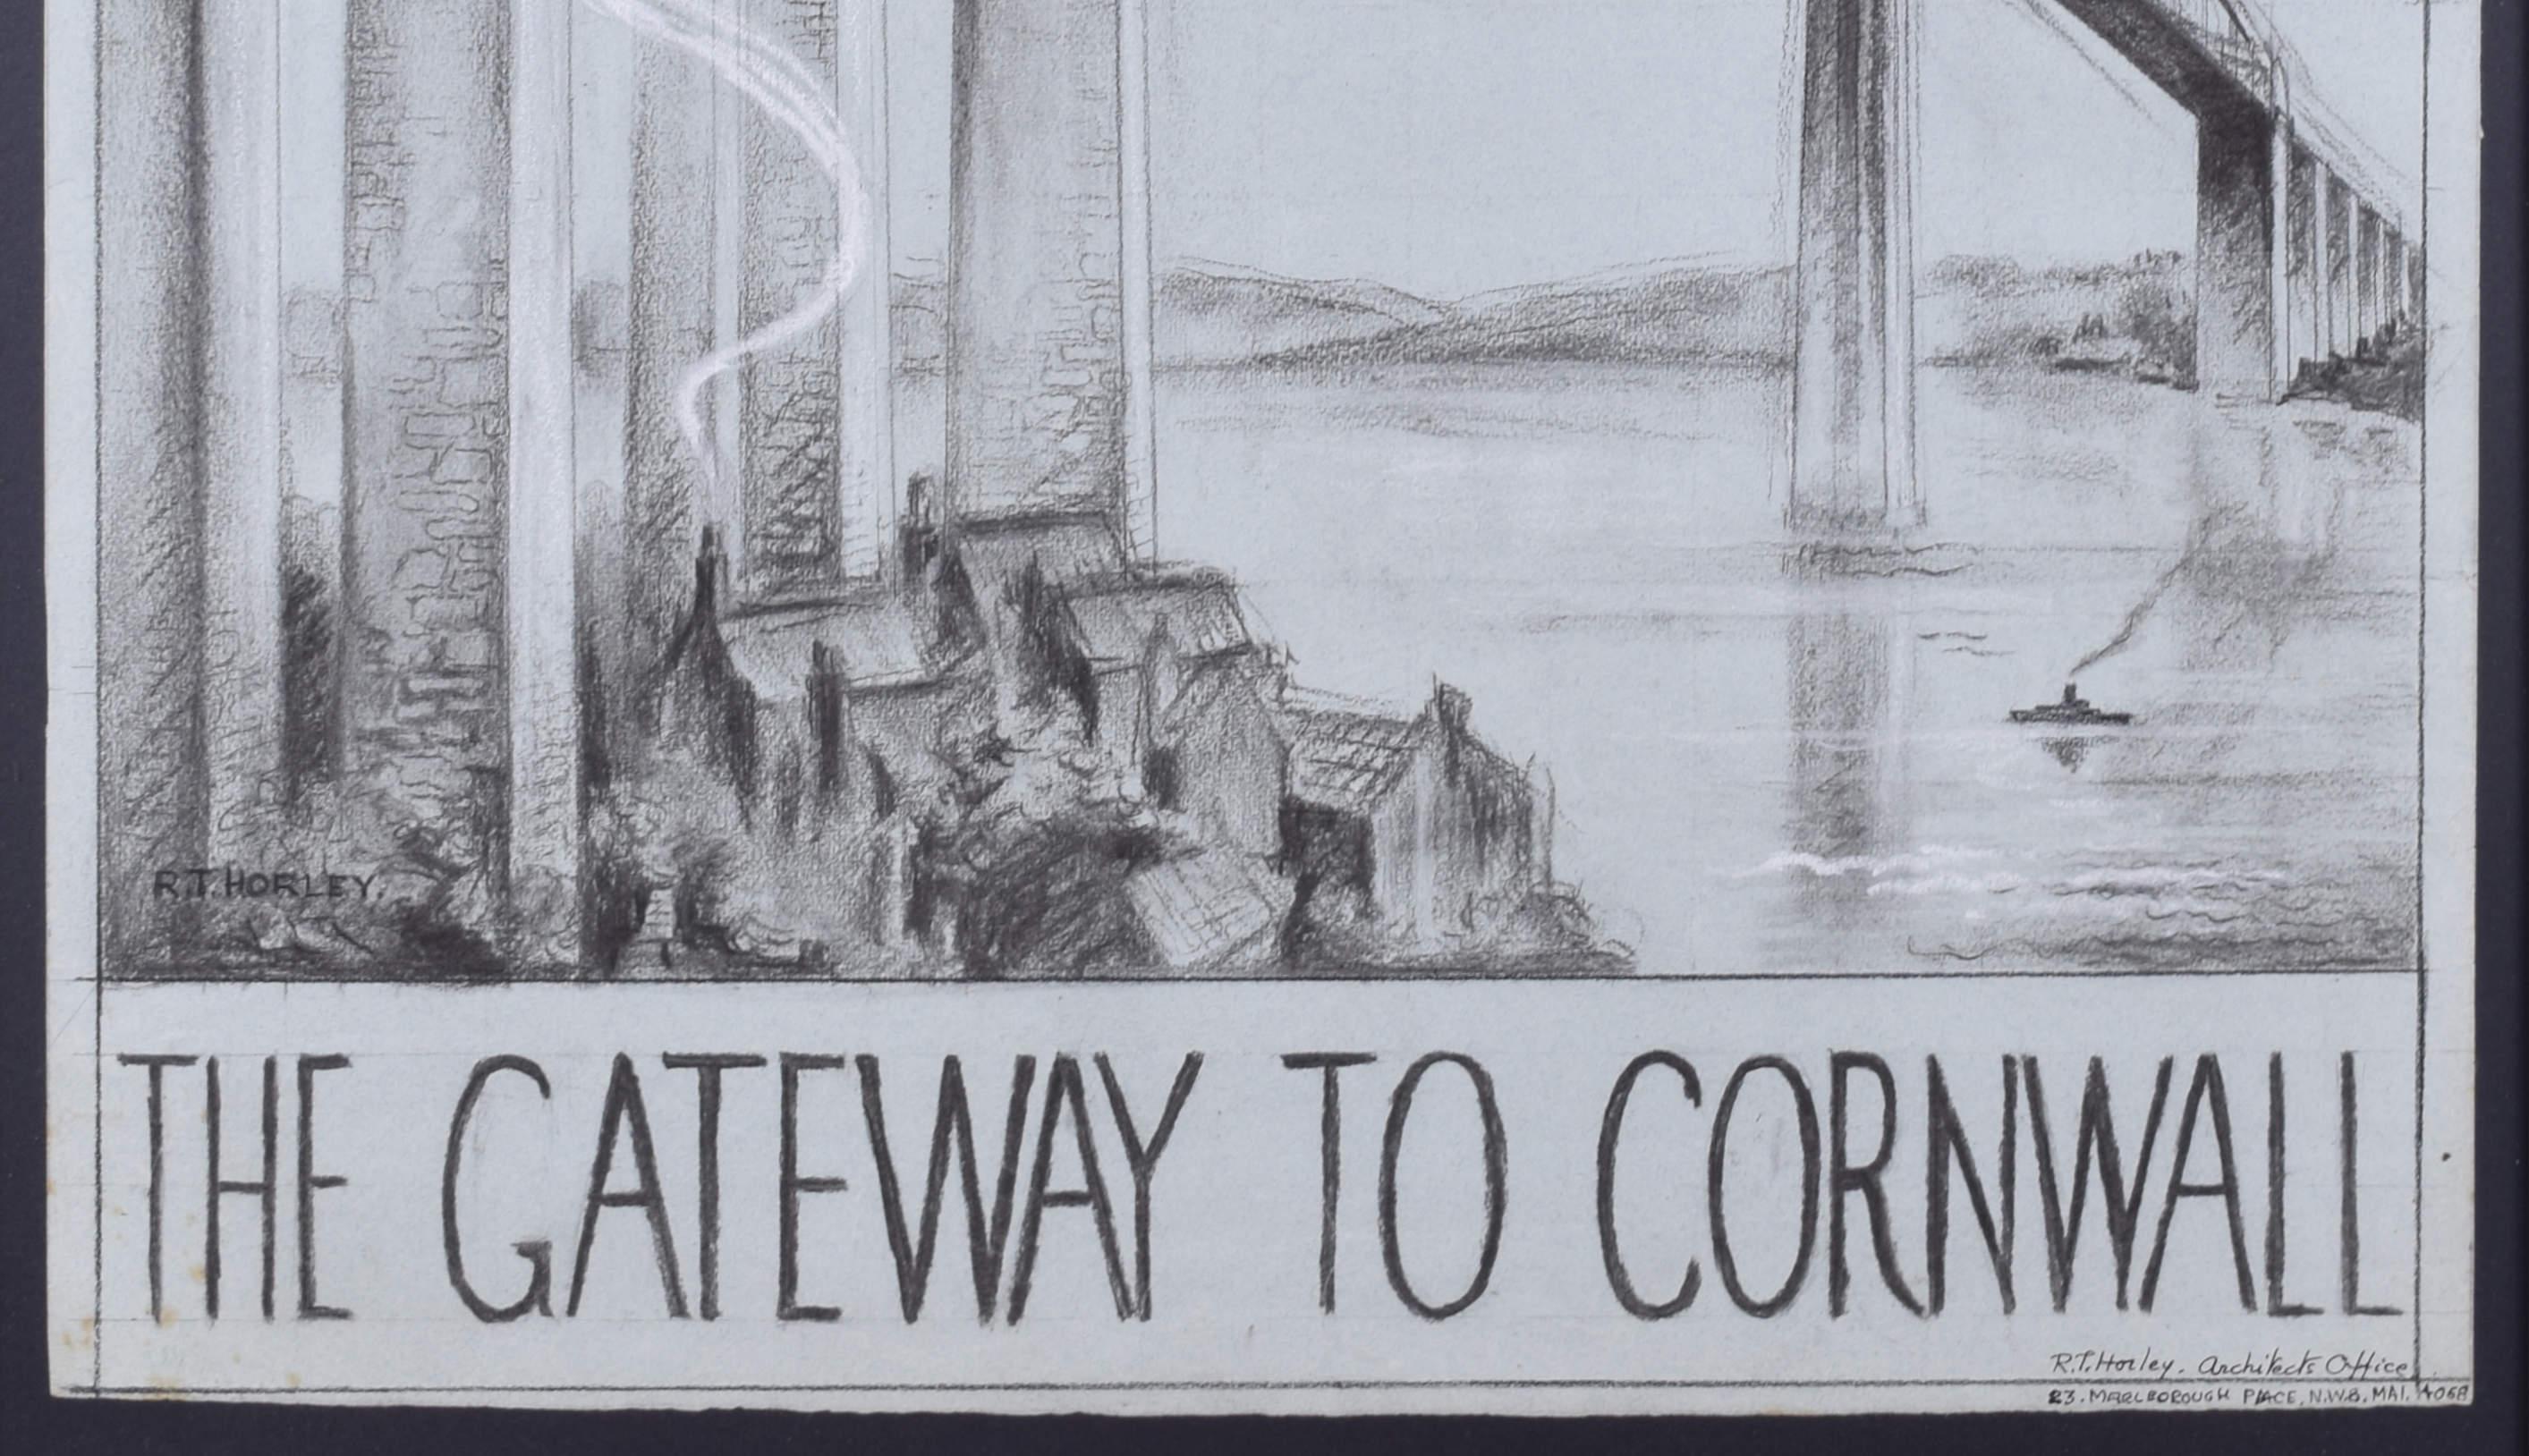 The Gateway to Cornwall GWR poster design charcoal drawing by Ronald T Horley For Sale 3